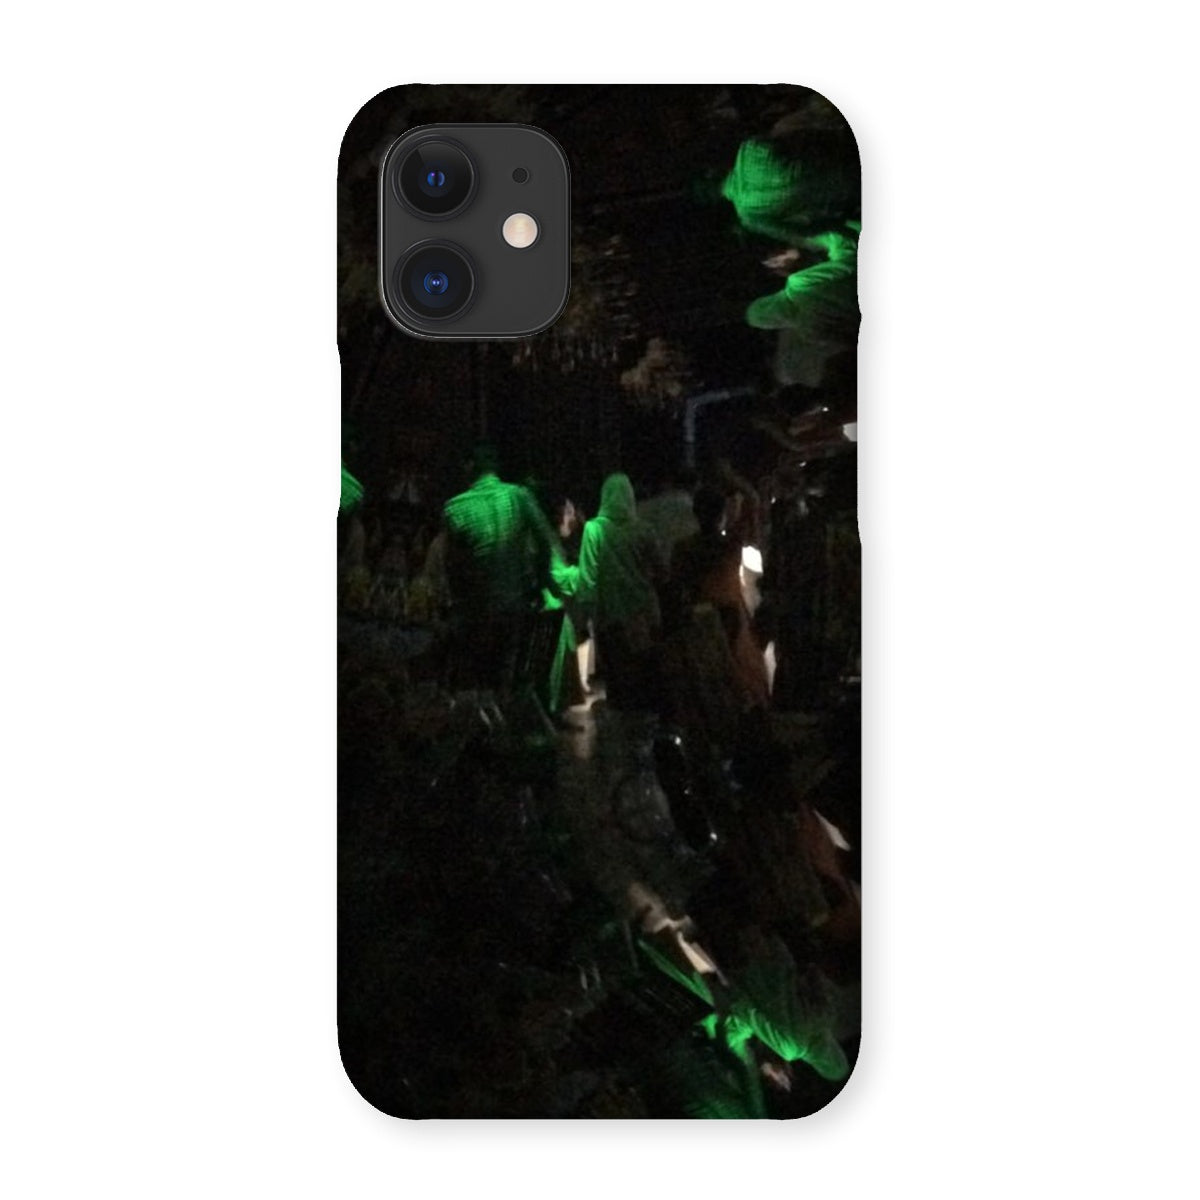 Nightlife Snap Phone Case - Stylish and Durable Cases for Any Phone, Goodies N Stuff